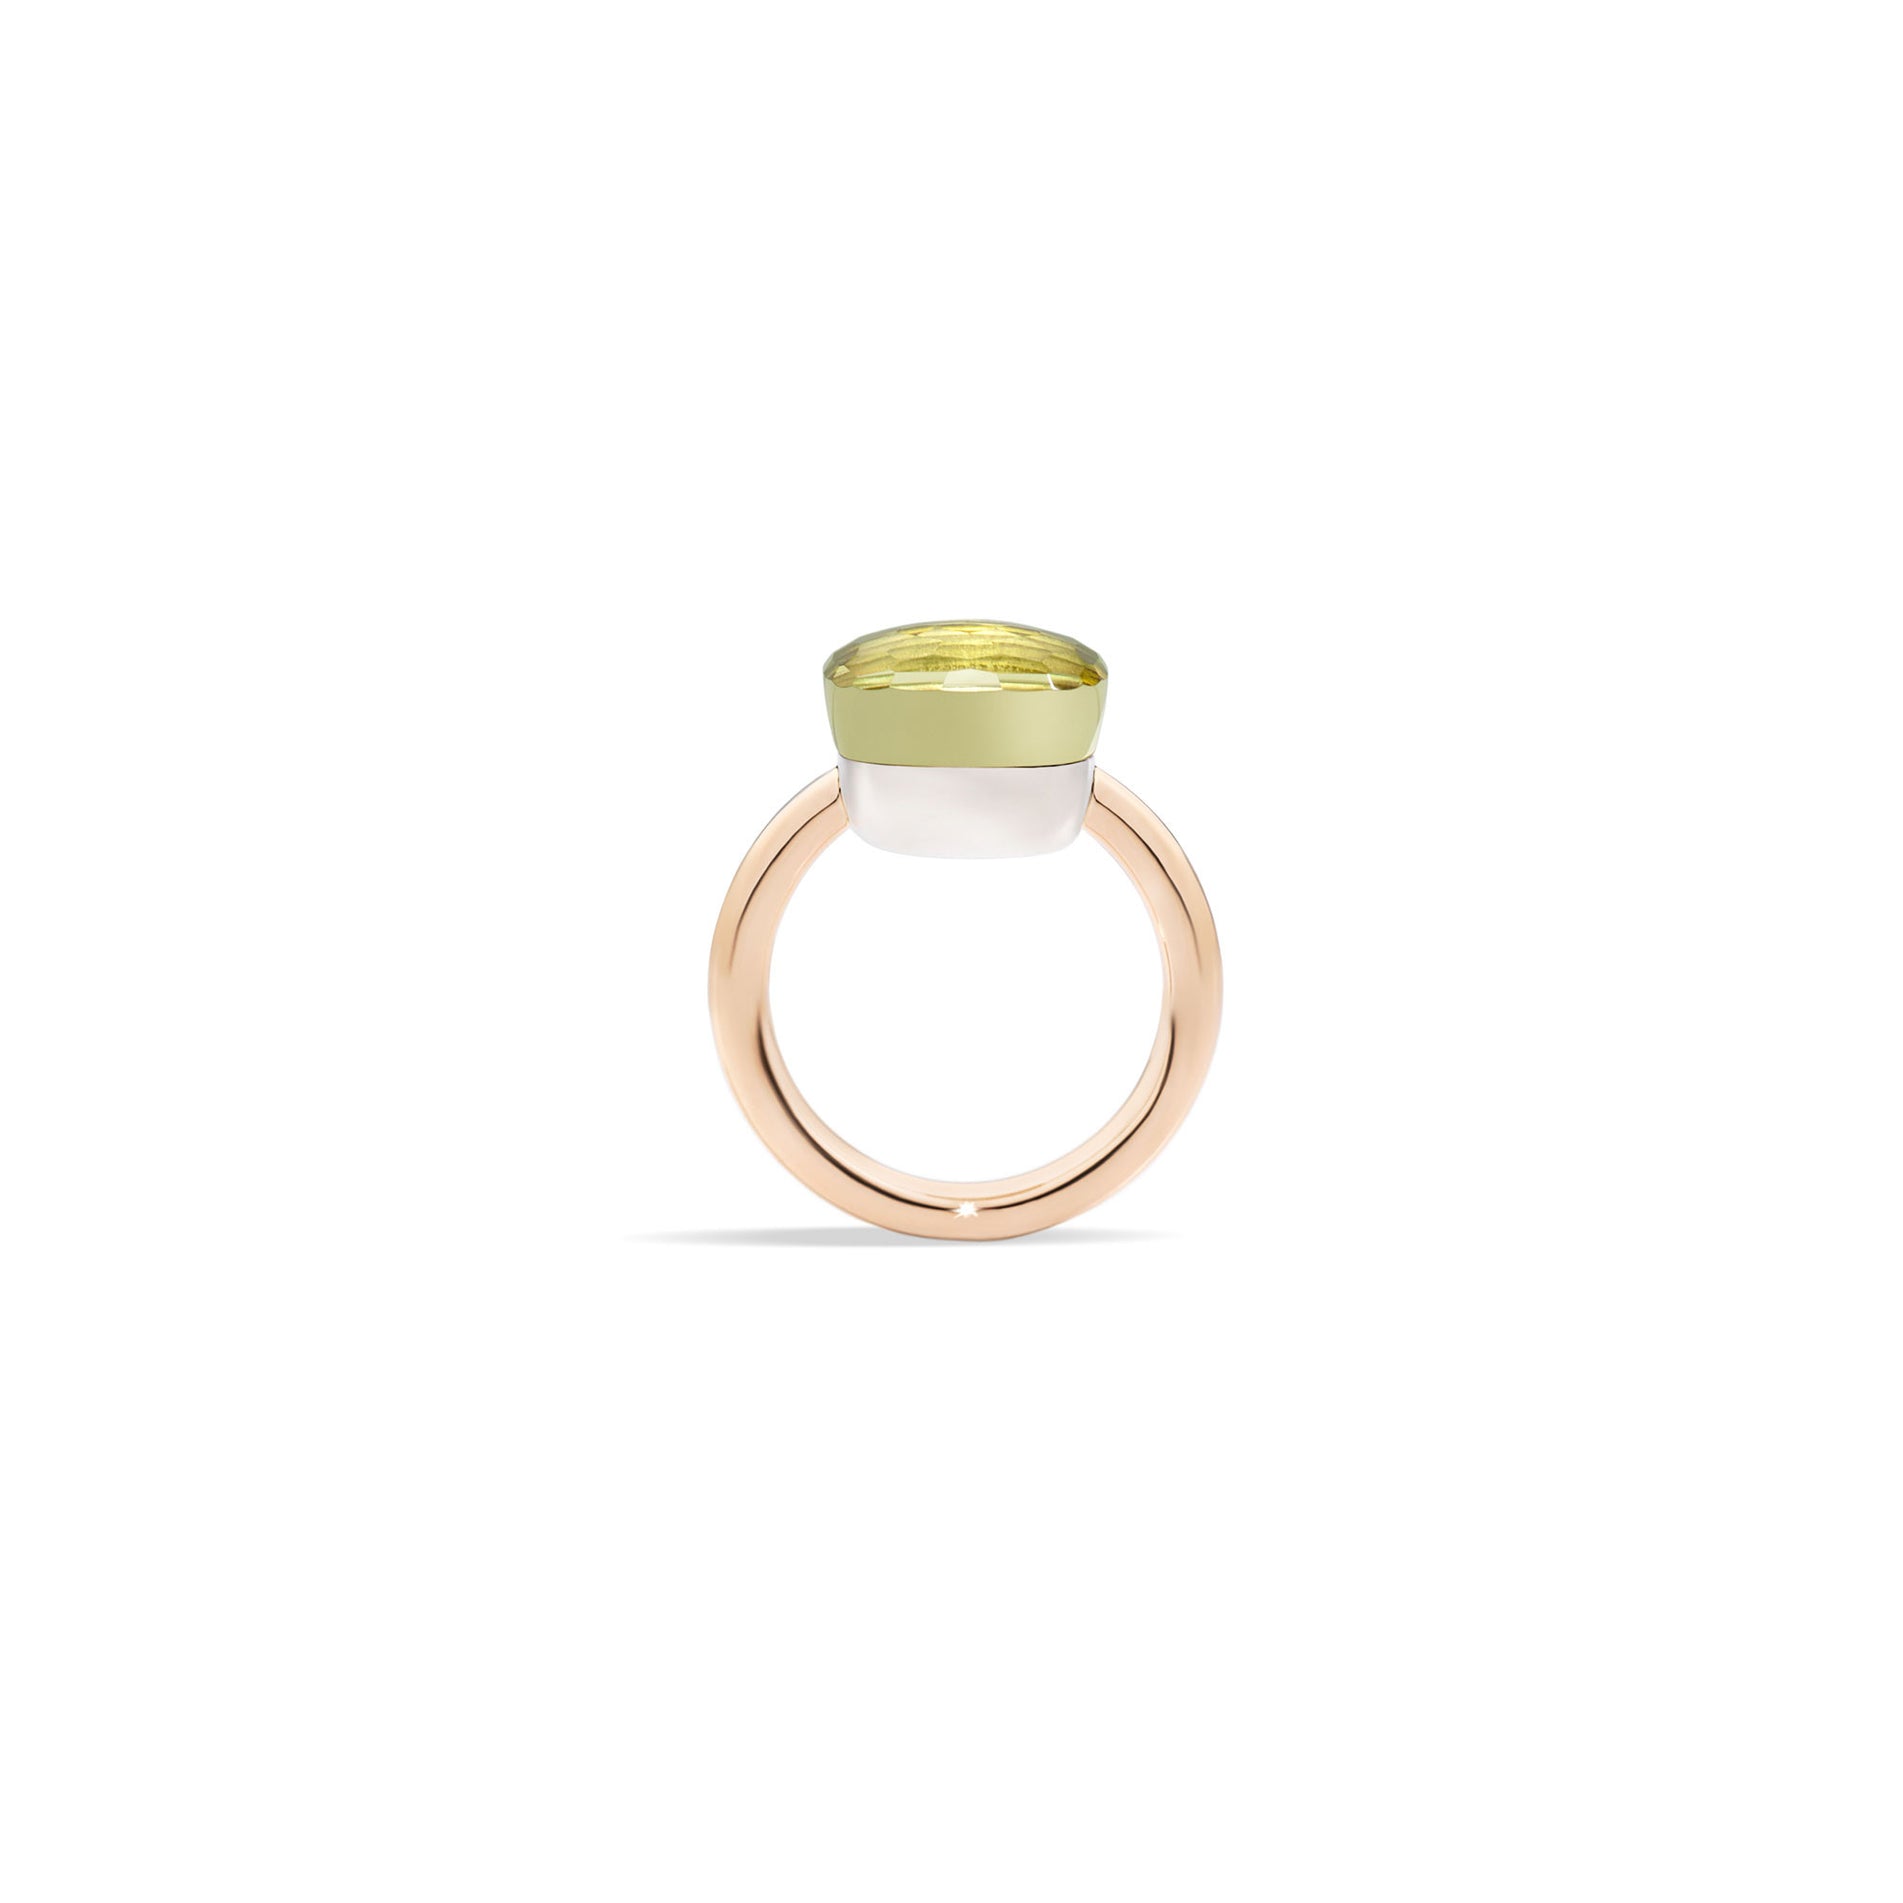 Nudo Maxi Ring in 18k Rose Gold and White Gold with Lemon Quartz - Orsini Jewellers NZ